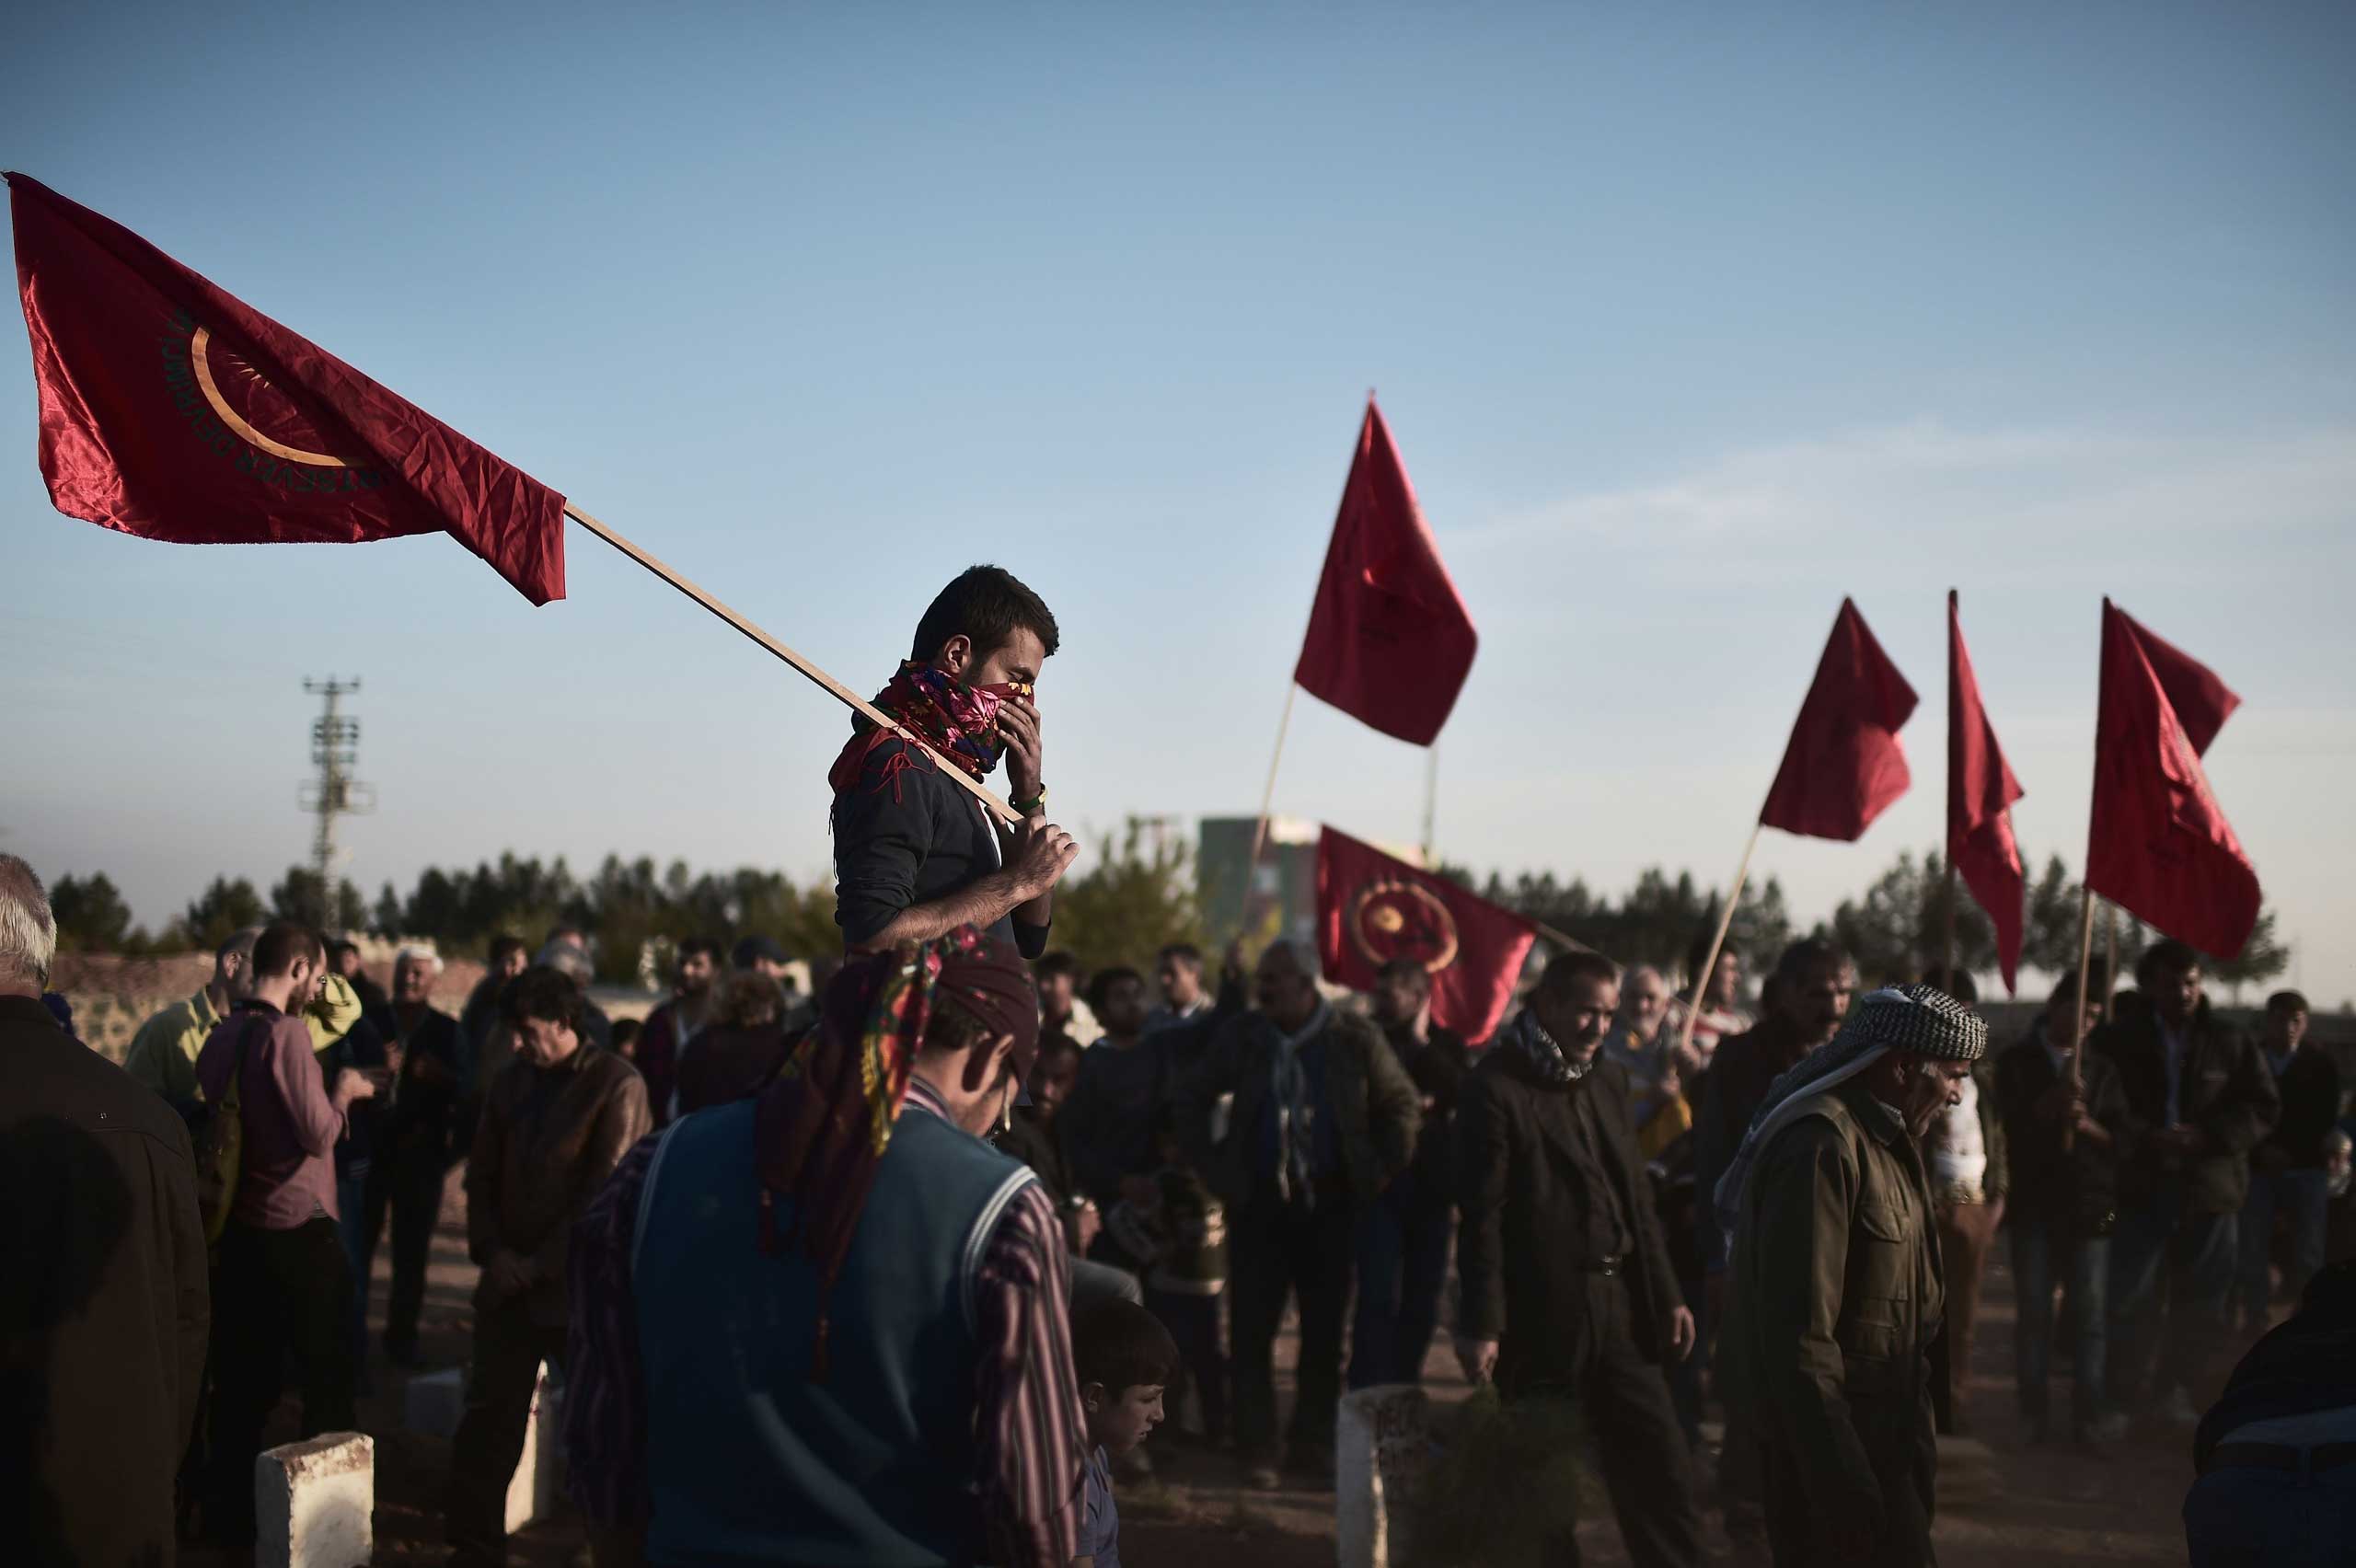 Nov. 12, 2014. Kurdish people gather in the Turkish town of Suruc in the Sanliurfa province to attend the funeral of a People's Protection Units (YPG) fighter who died while fighting in the Syrian Kurdish flashpoint town of Kobane, also known as Ayn al-Arab.